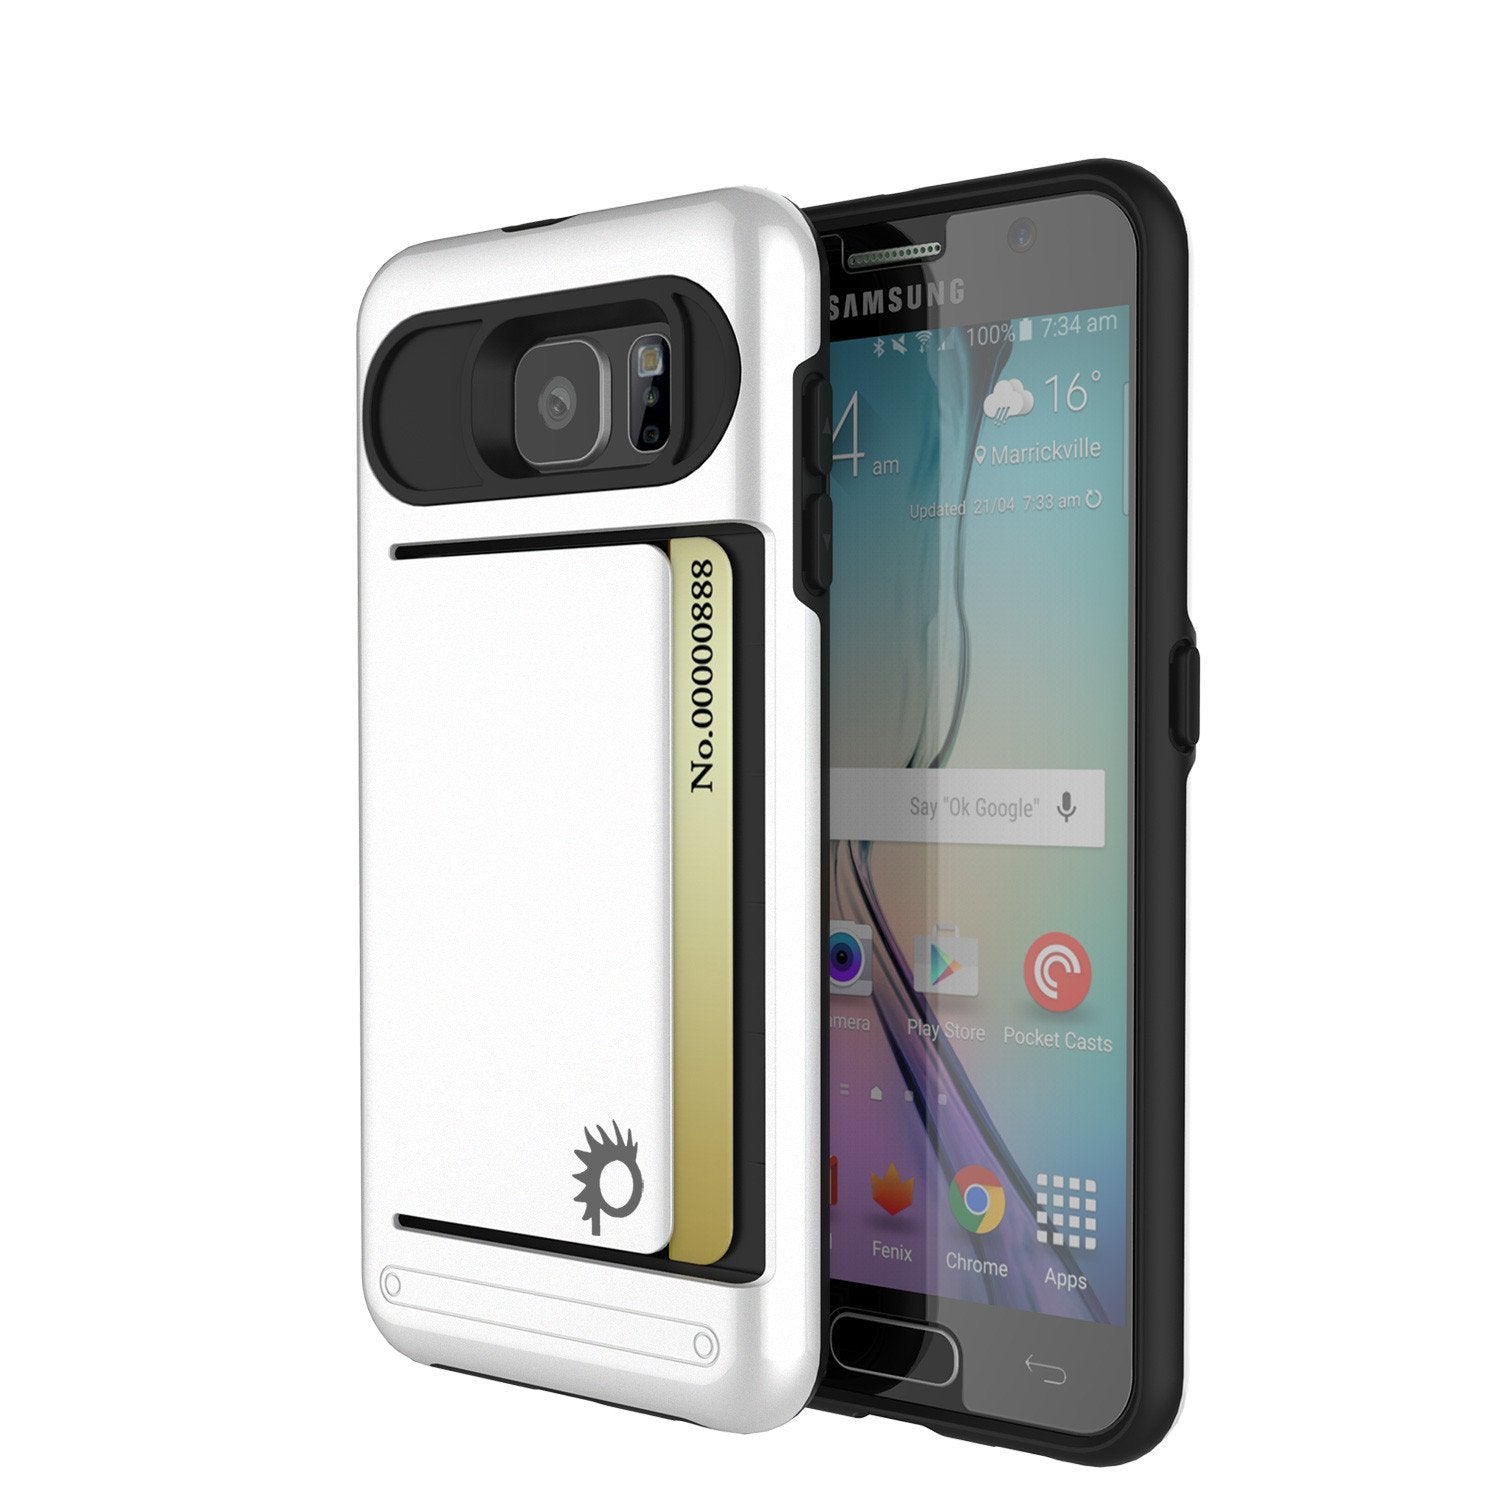 Galaxy S6 EDGE Case PunkCase CLUTCH White Series Slim Armor Soft Cover Case w/ Screen Protector - PunkCase NZ